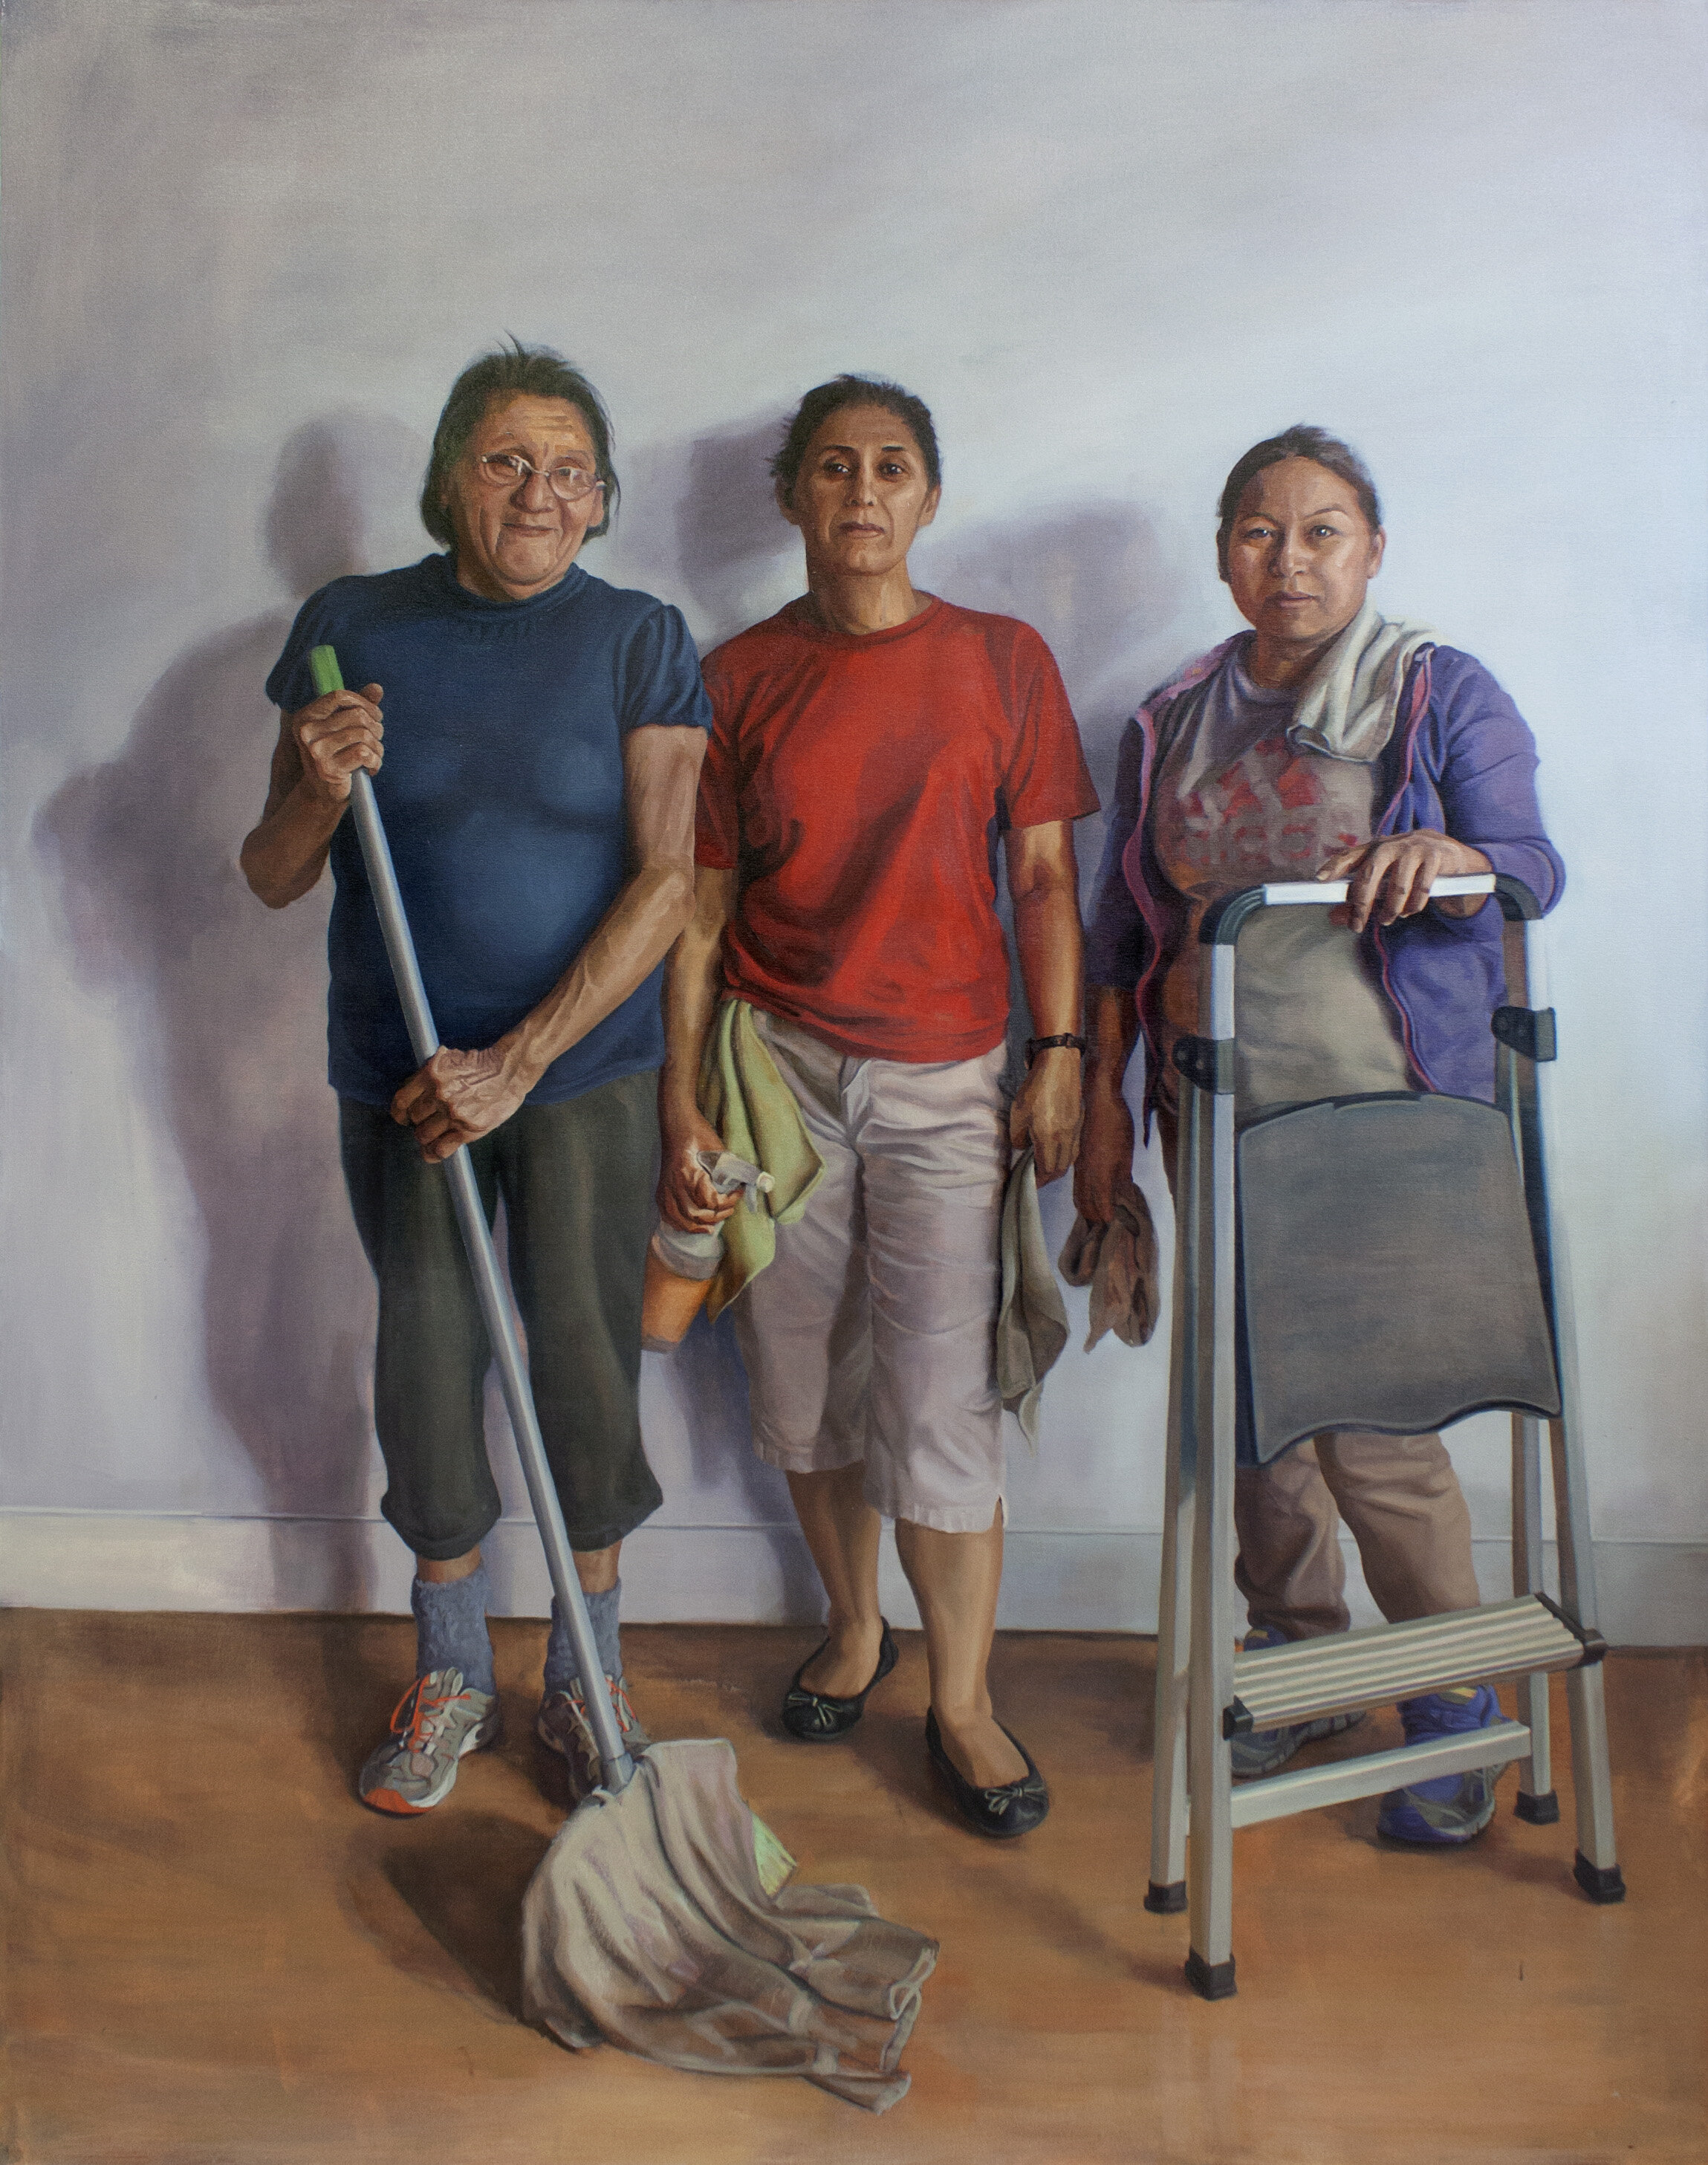  Arely Morales,&nbsp; Una por una (One by One) , 2019, oil on canvas, 95 x 75 inches, Loan Courtesy of the Artist 